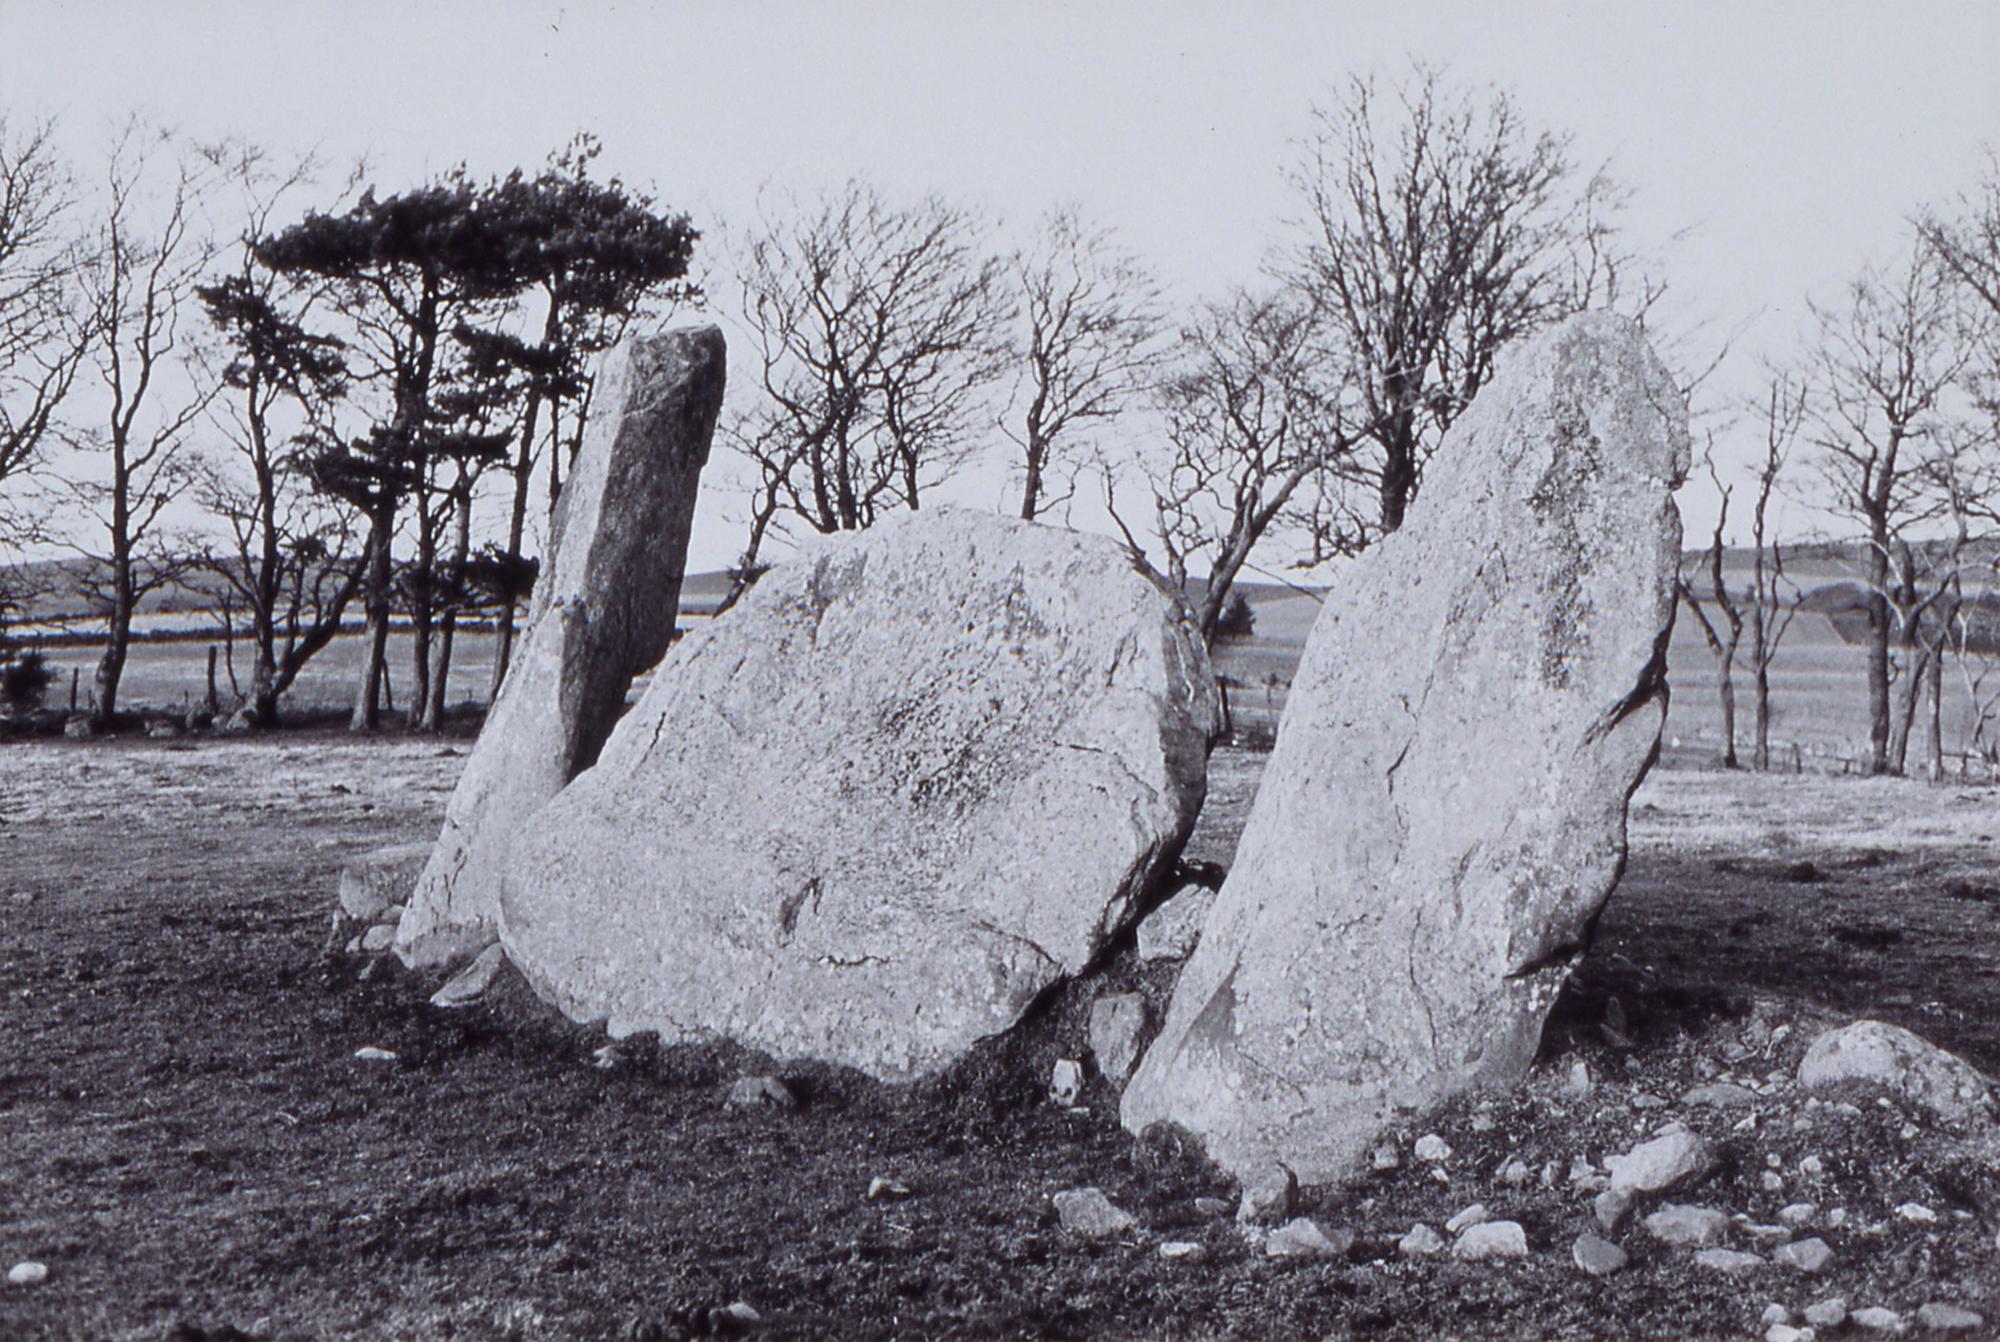 A black and white photograph of three large stones standing upright in the grass. A row of trees lines the field these sit in and the horizon stretches out behind the stones.